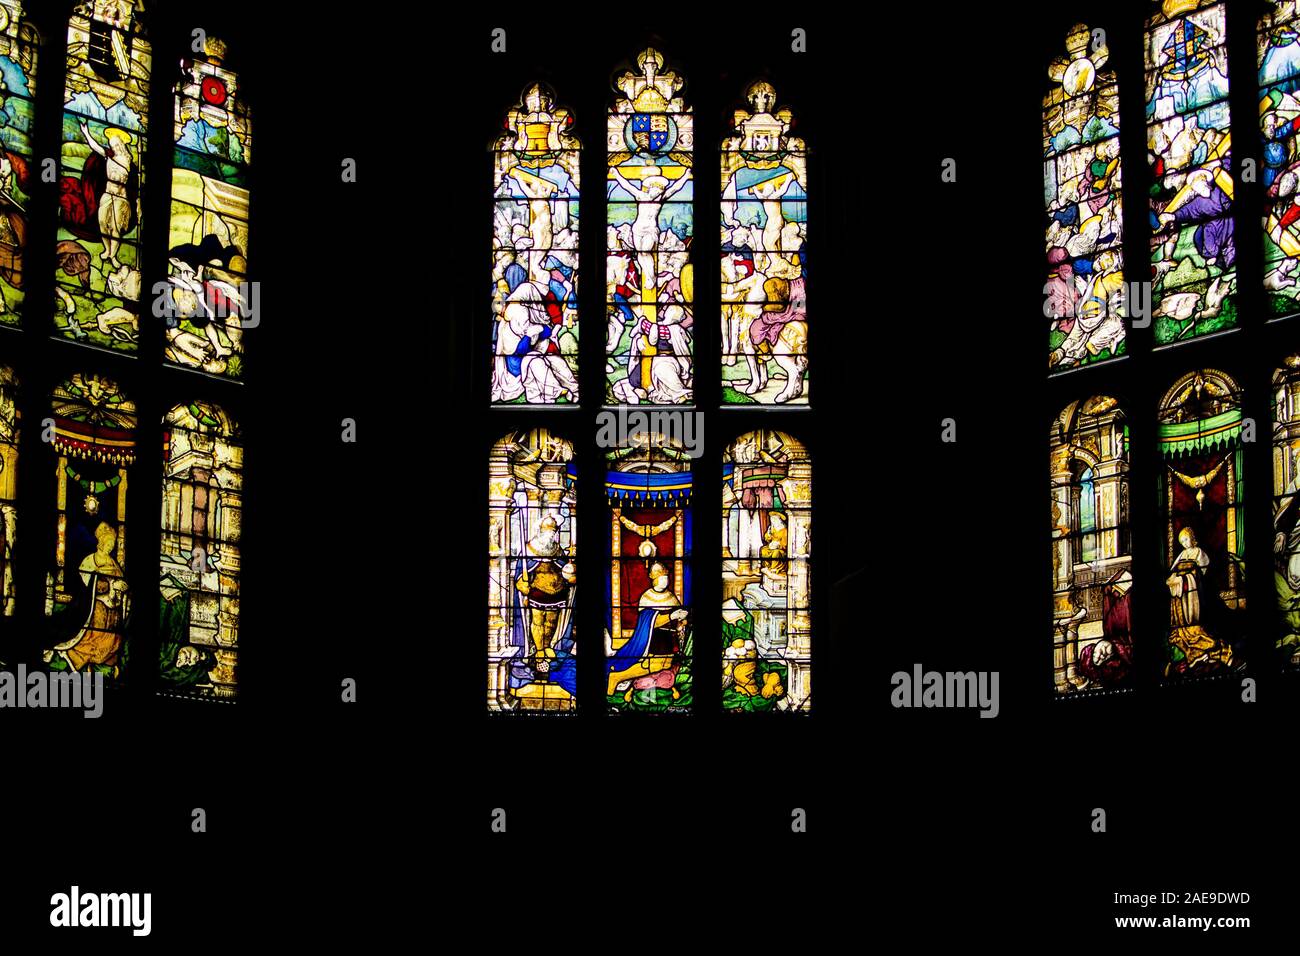 16th century stained glass windows in the chapel at The Vyne, Hampshire. Considered to be among the most beautiful 16th-century glass in Europe. Stock Photo